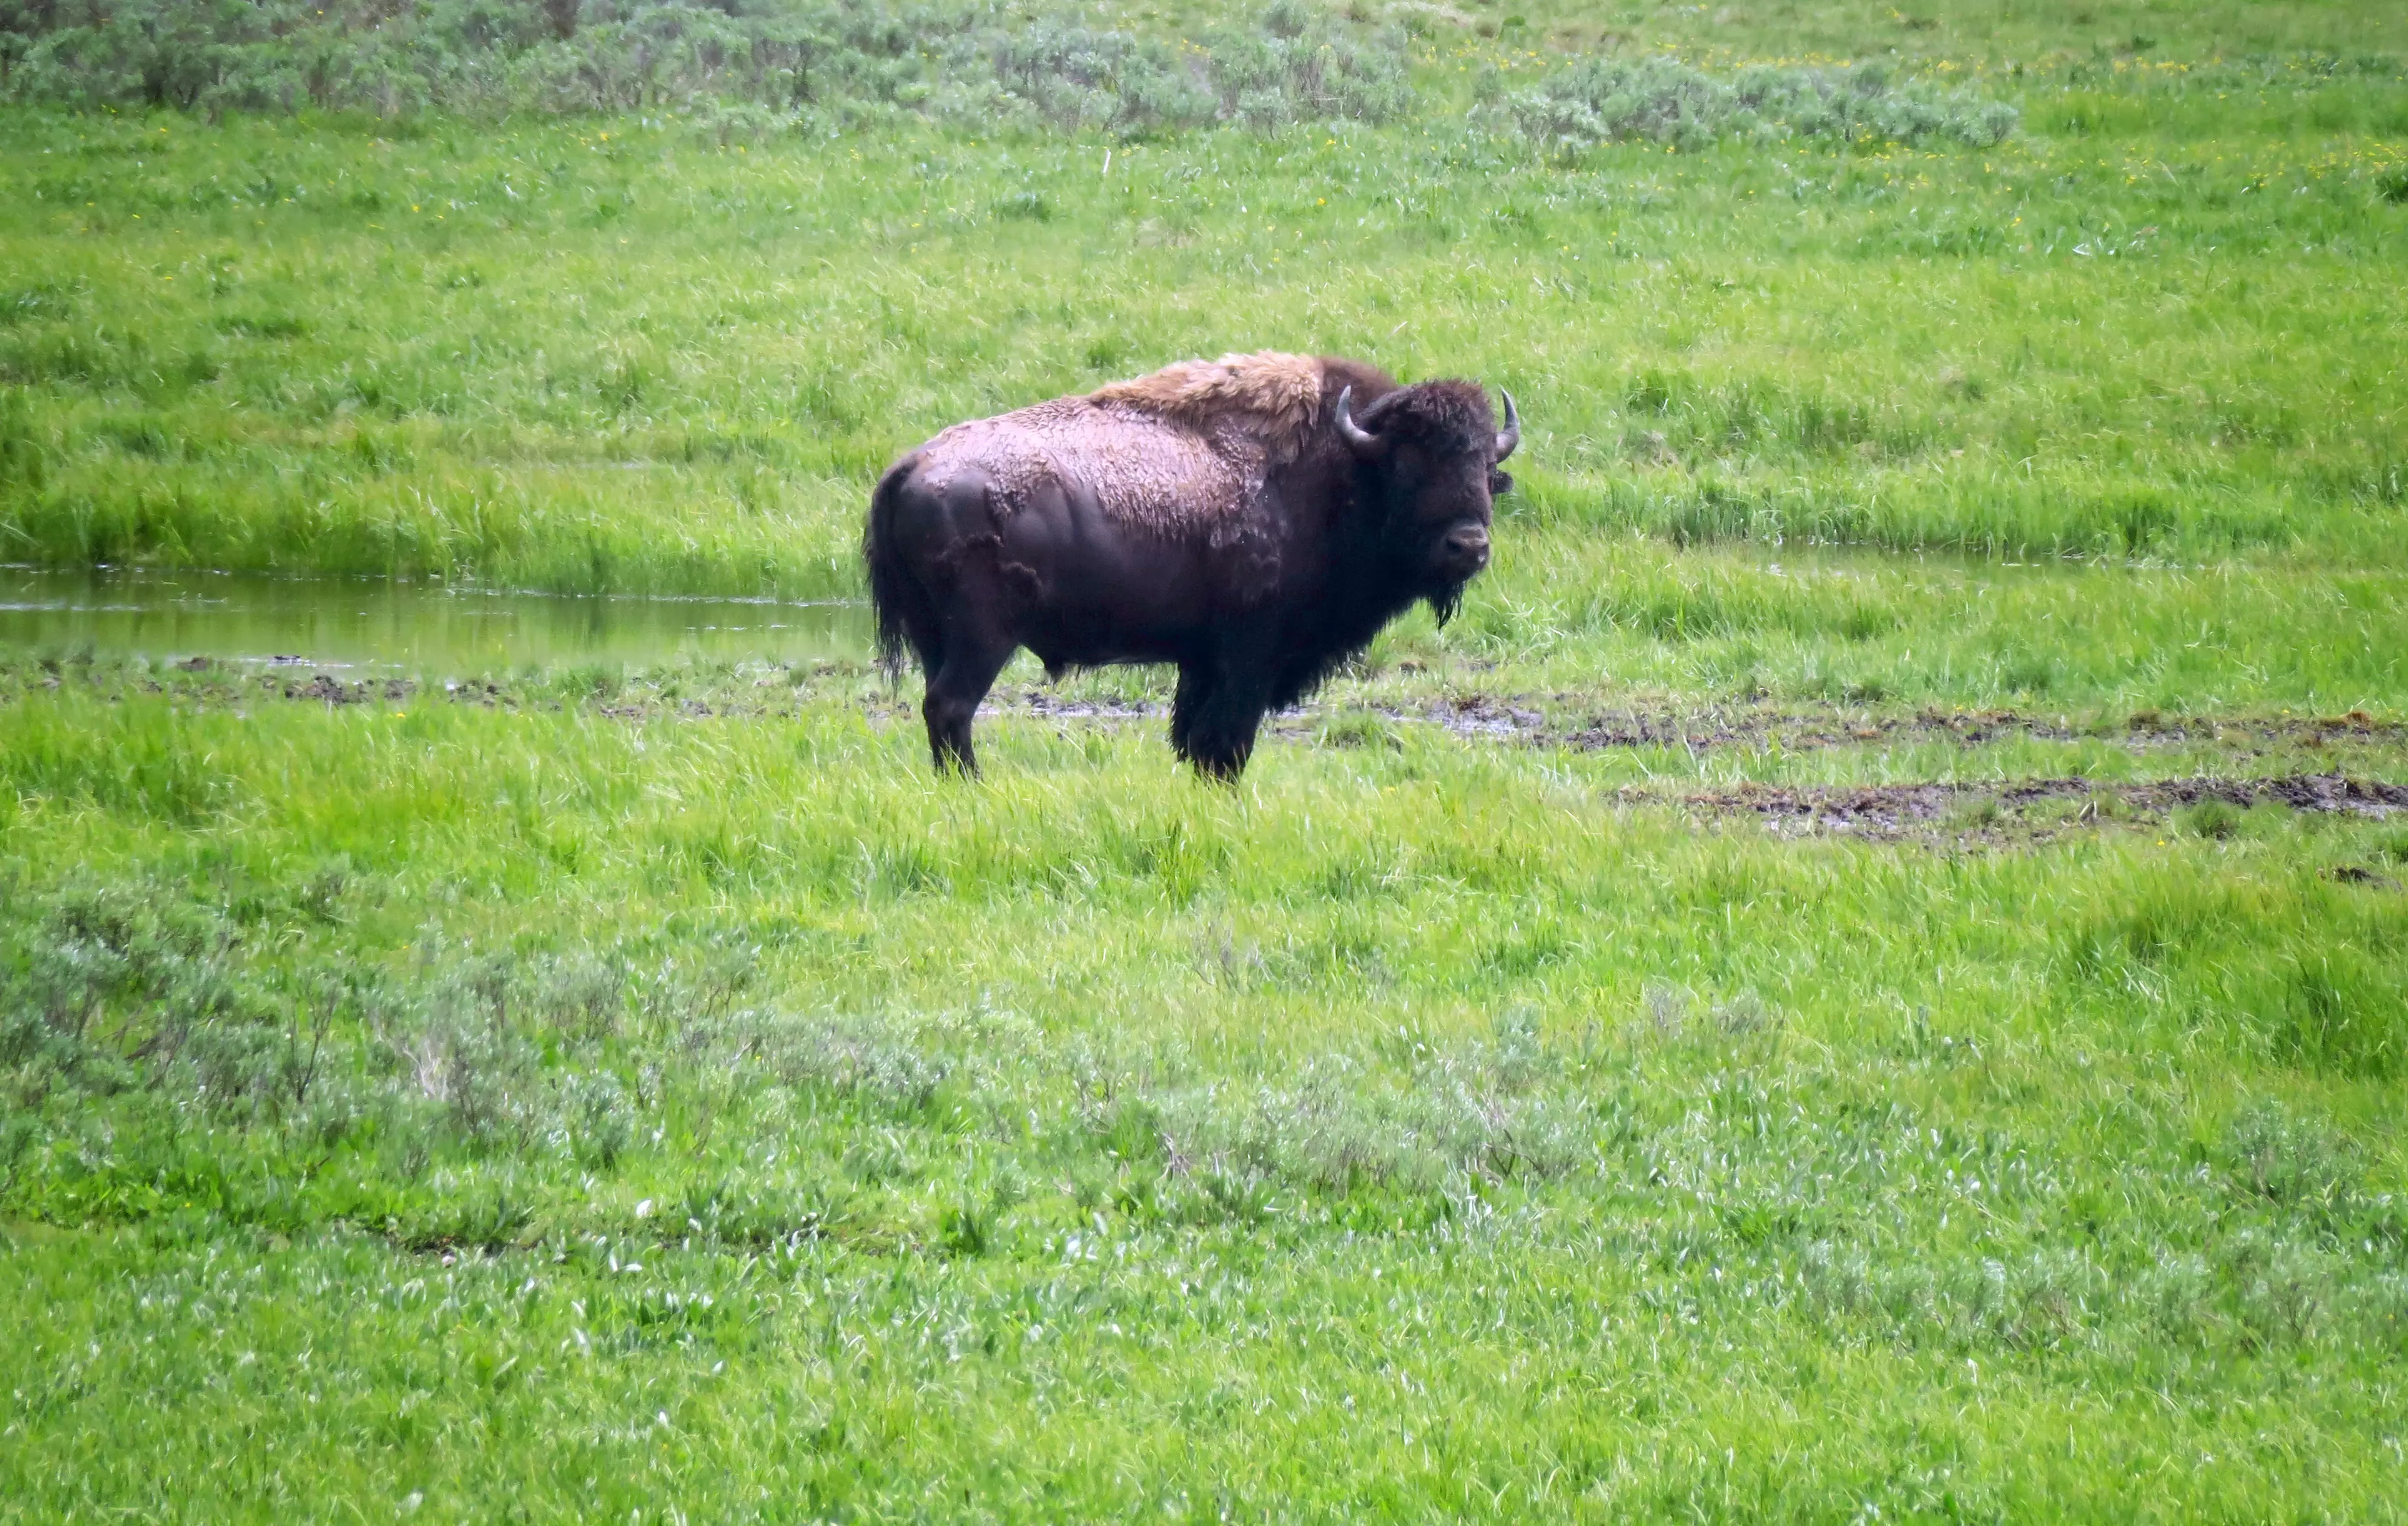 Visitors to Yellowstone are advised to maintain a distance of 25 yards from bison.